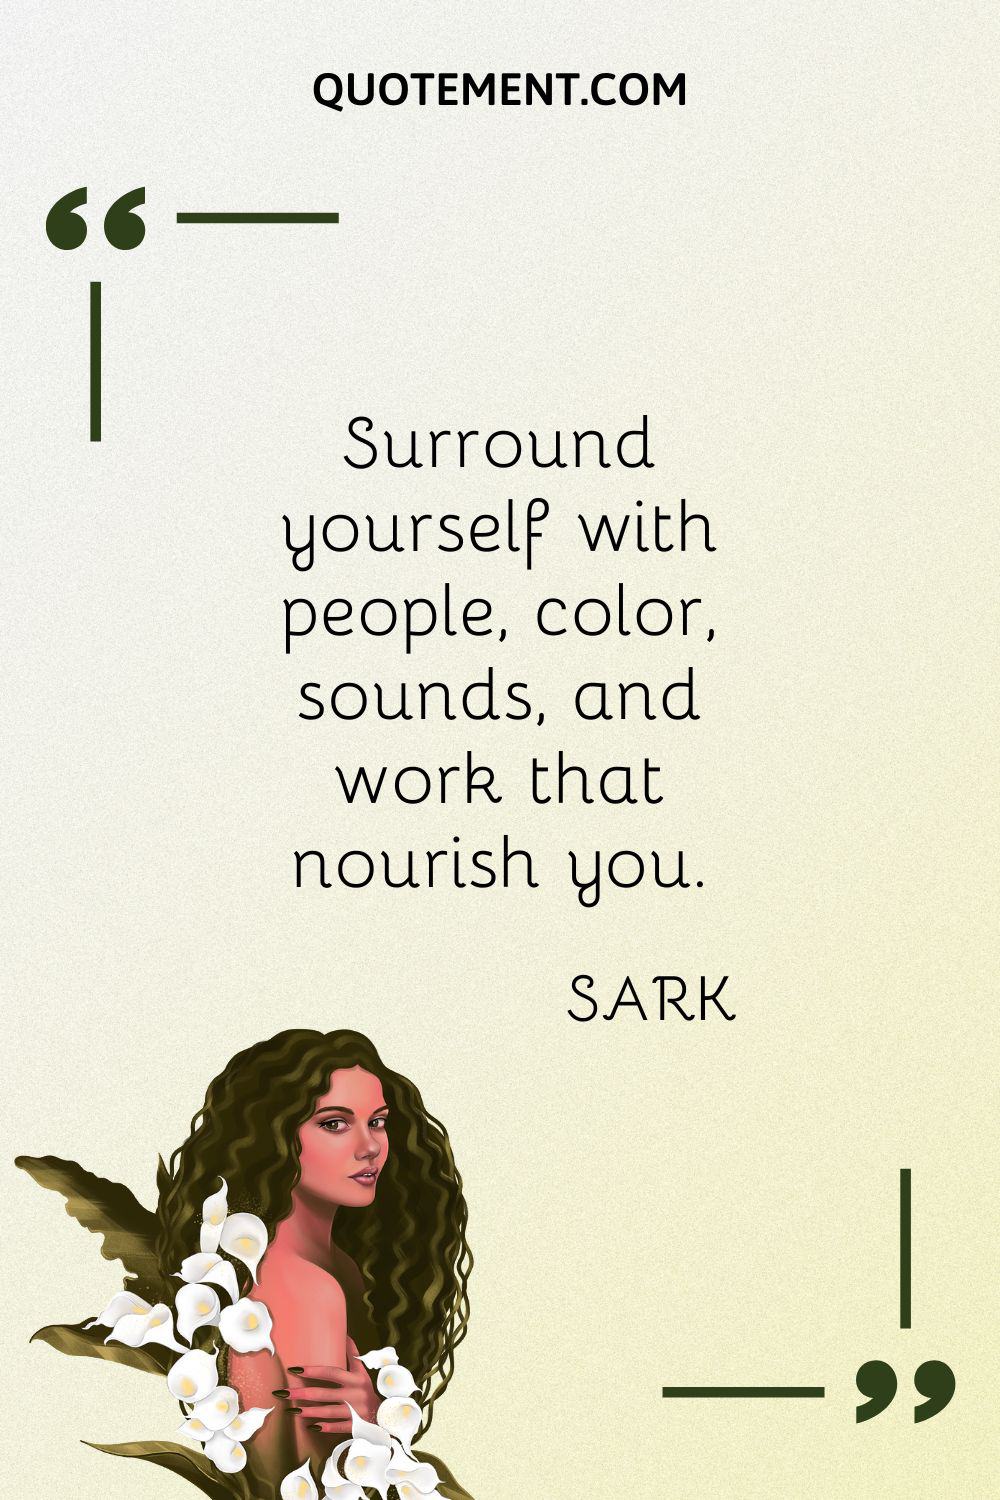 Surround yourself with people,